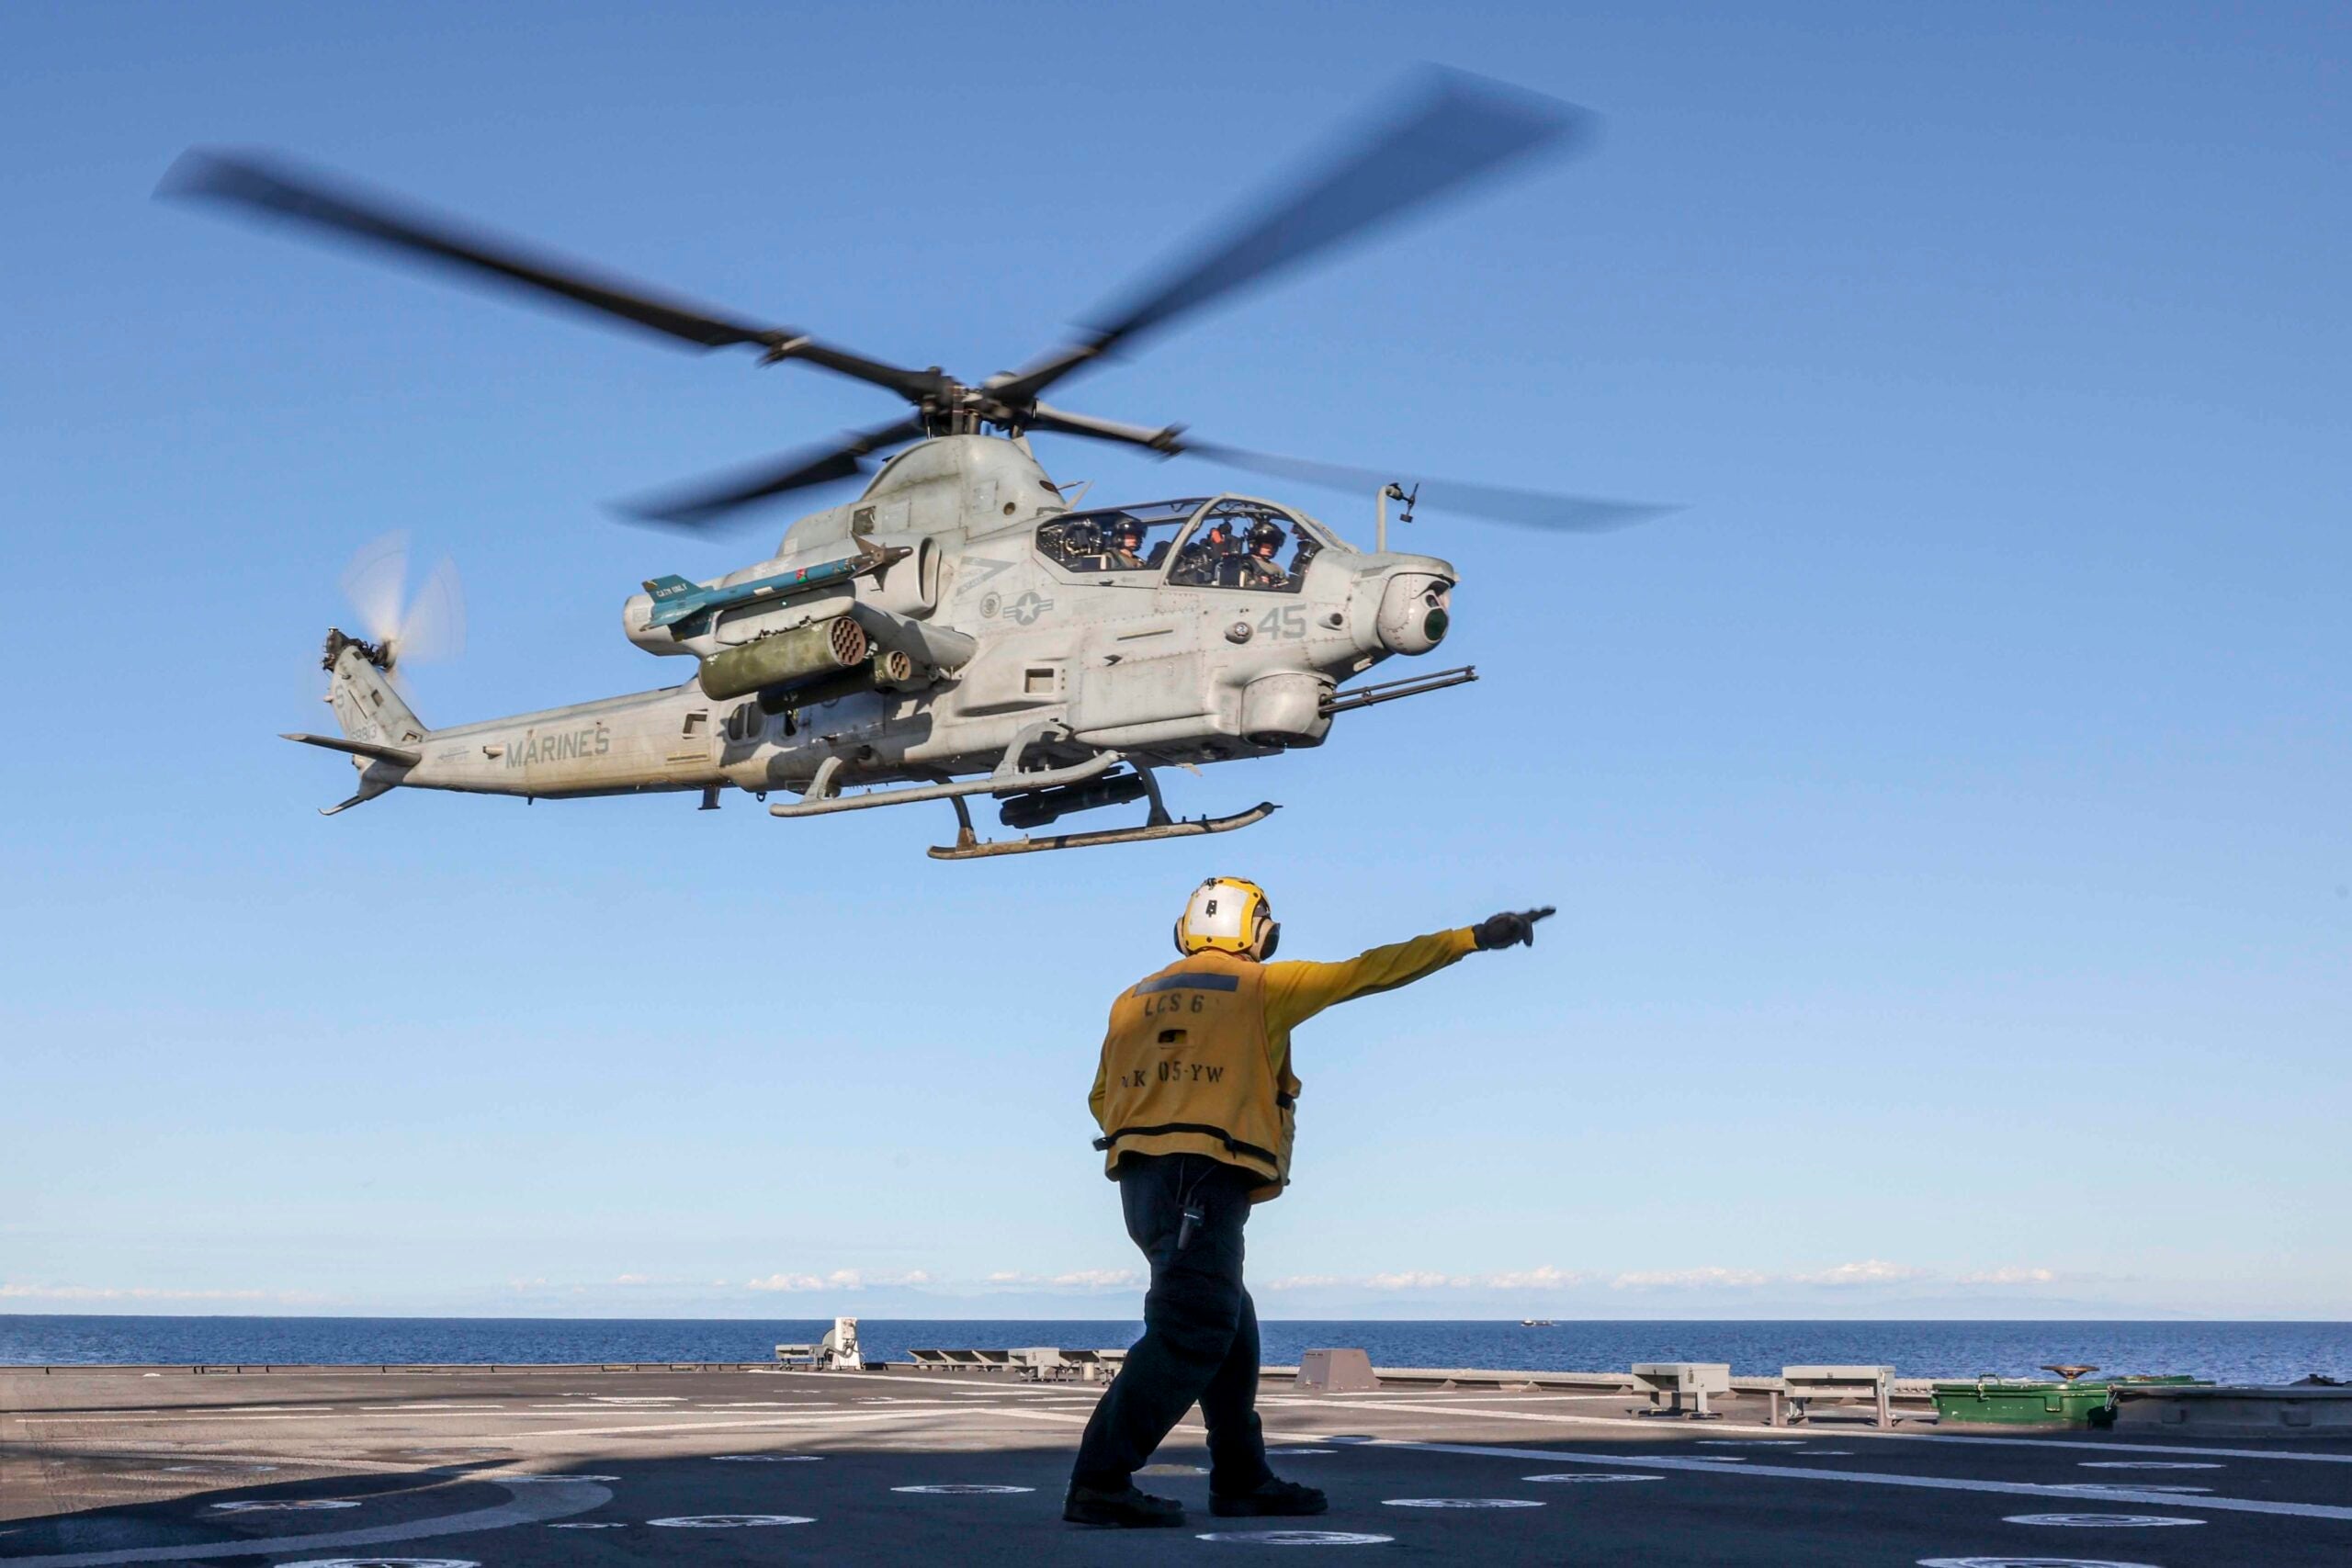 U.S. Marines with Marine Light Attack Helicopter Squadron 369, Marine Aircraft Group 39, 3rd Marine Aircraft Wing (MAW), fly an AH-1Z Viper off of the USS Jackson (LCS 6) during exercise Steel Knight 23, in the Pacific Ocean, Dec. 10, 2022. Exercise Steel Knight 23 provides 3rd MAW an opportunity to refine Wing-level warfighting in support of I Marine Expeditionary Force and fleet maneuver. (U.S. Marine Corps photo by Sgt. Samuel Fletcher)